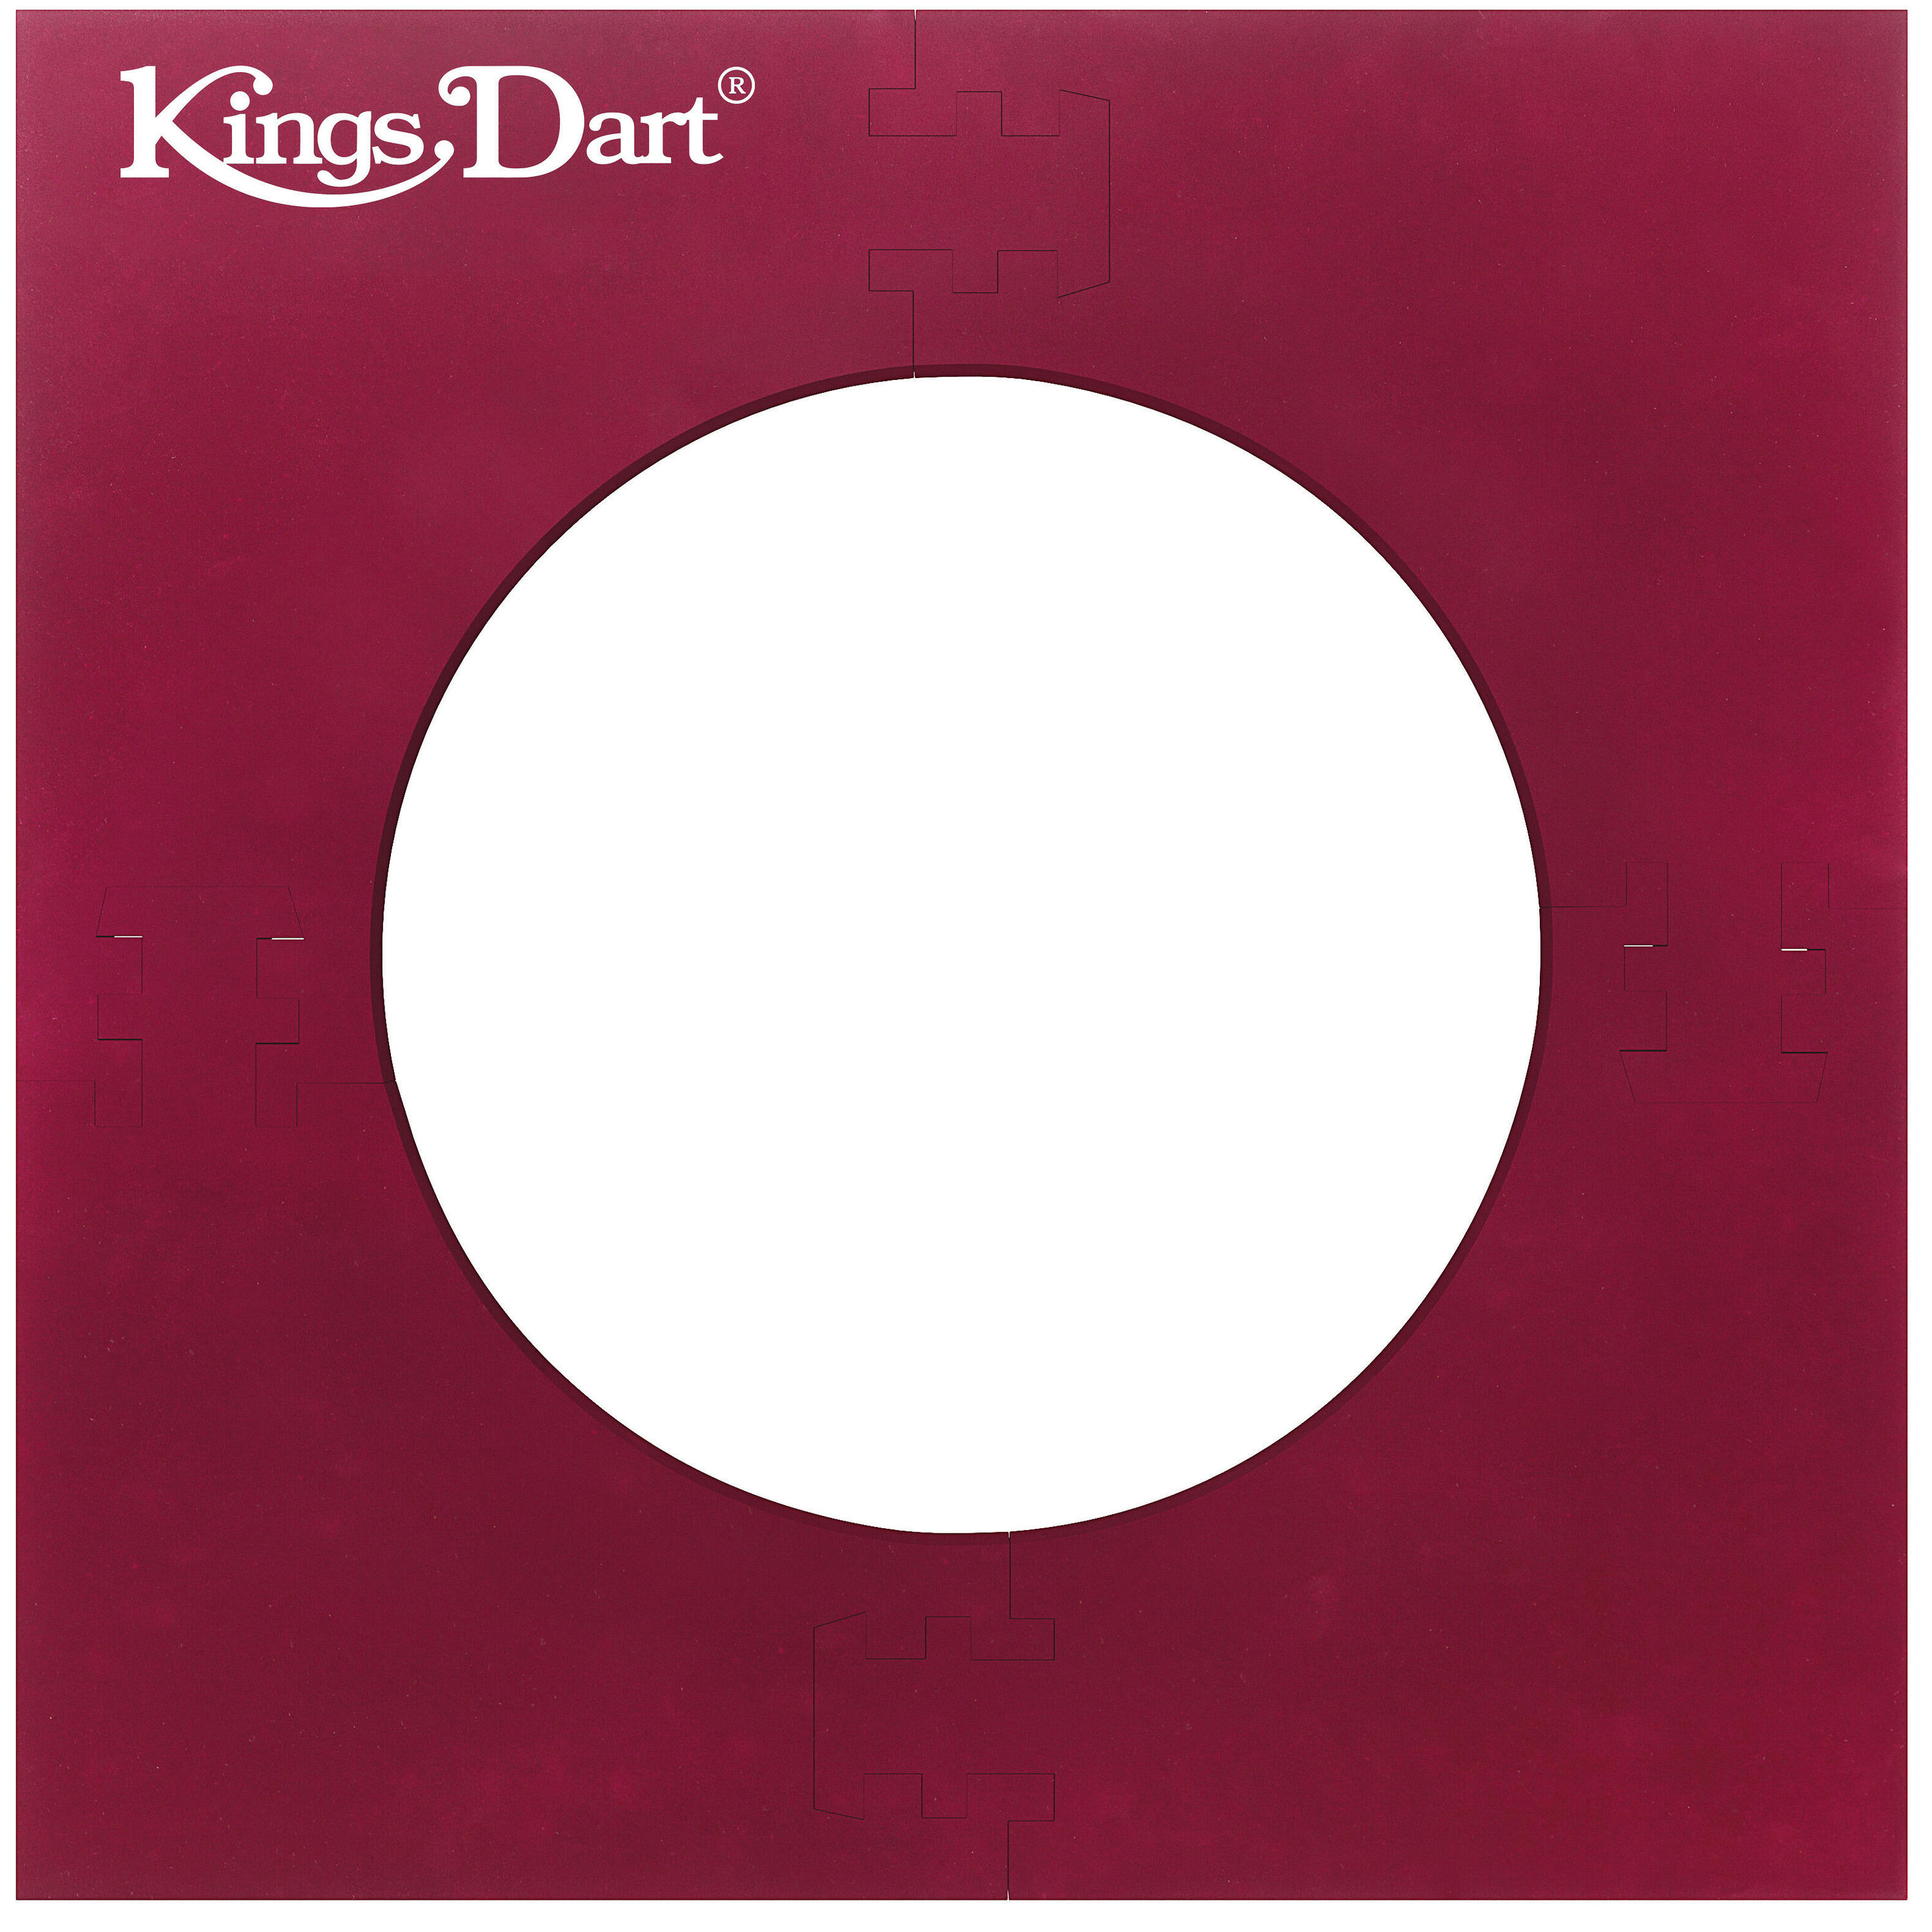 Kings Dart Dartboard Surround Standard 10pcs thick translucent dart flights tails feather accessories for dartboard games leaves